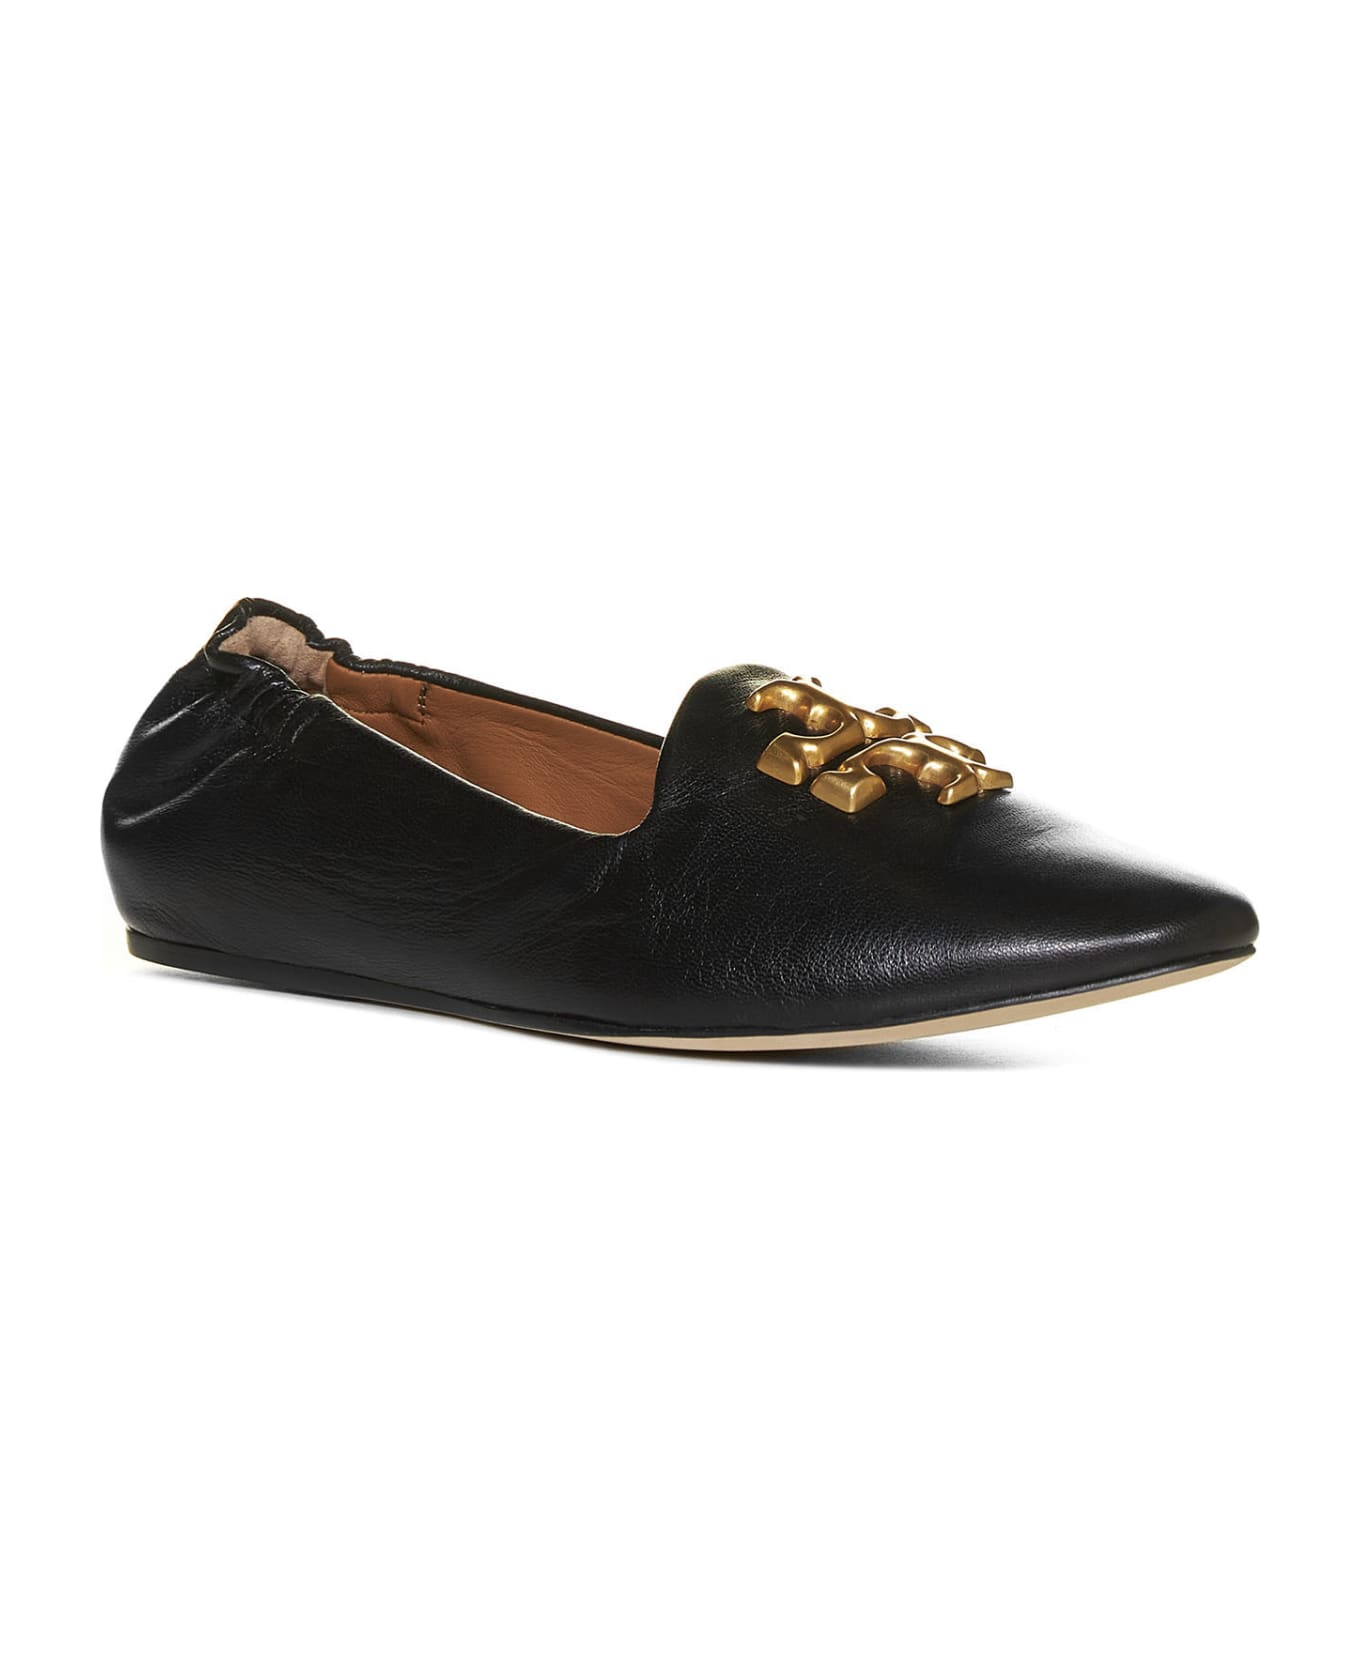 Tory Burch Eleanor Loafers - Perfect black フラットシューズ